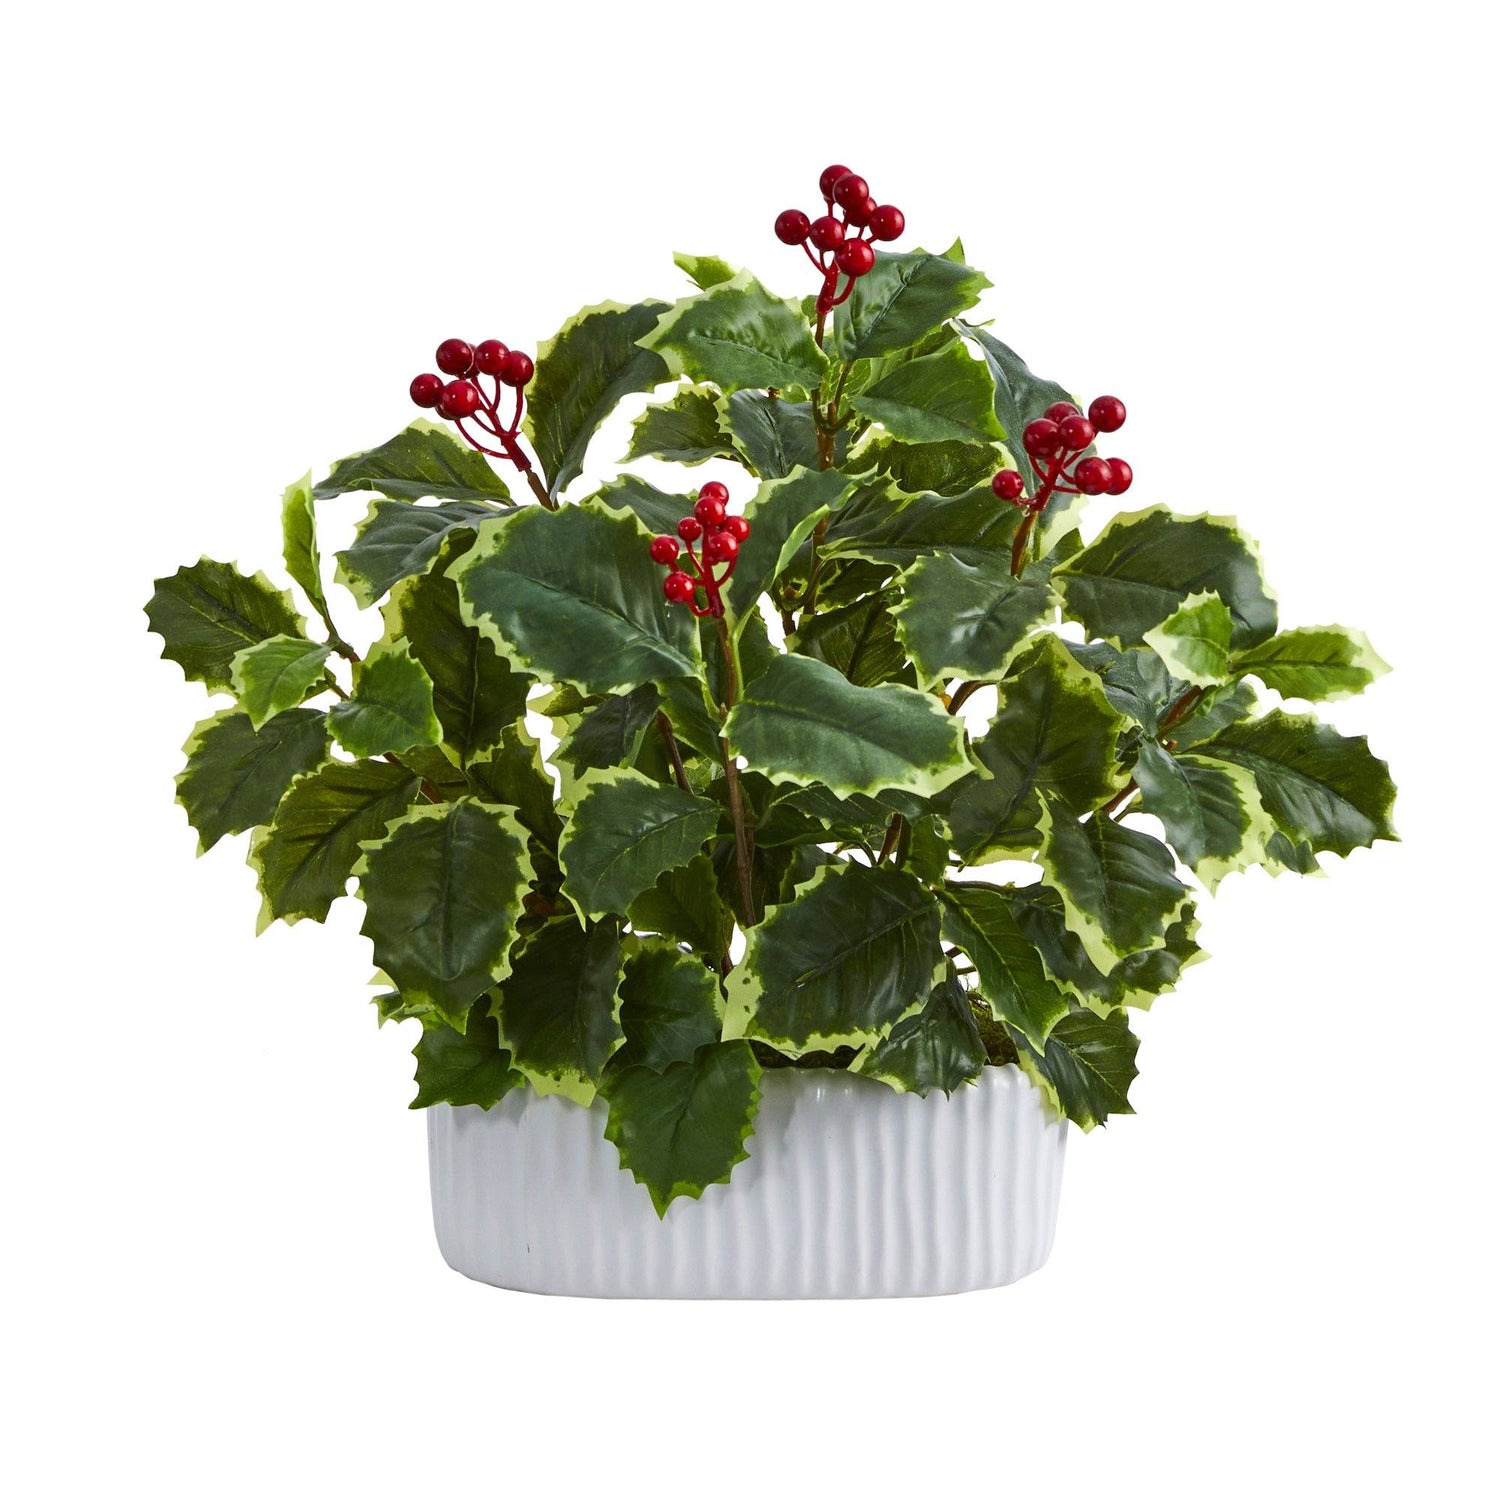 13” Variegated Holly Leaf Artificial Plant in White Planter (Real Touch)